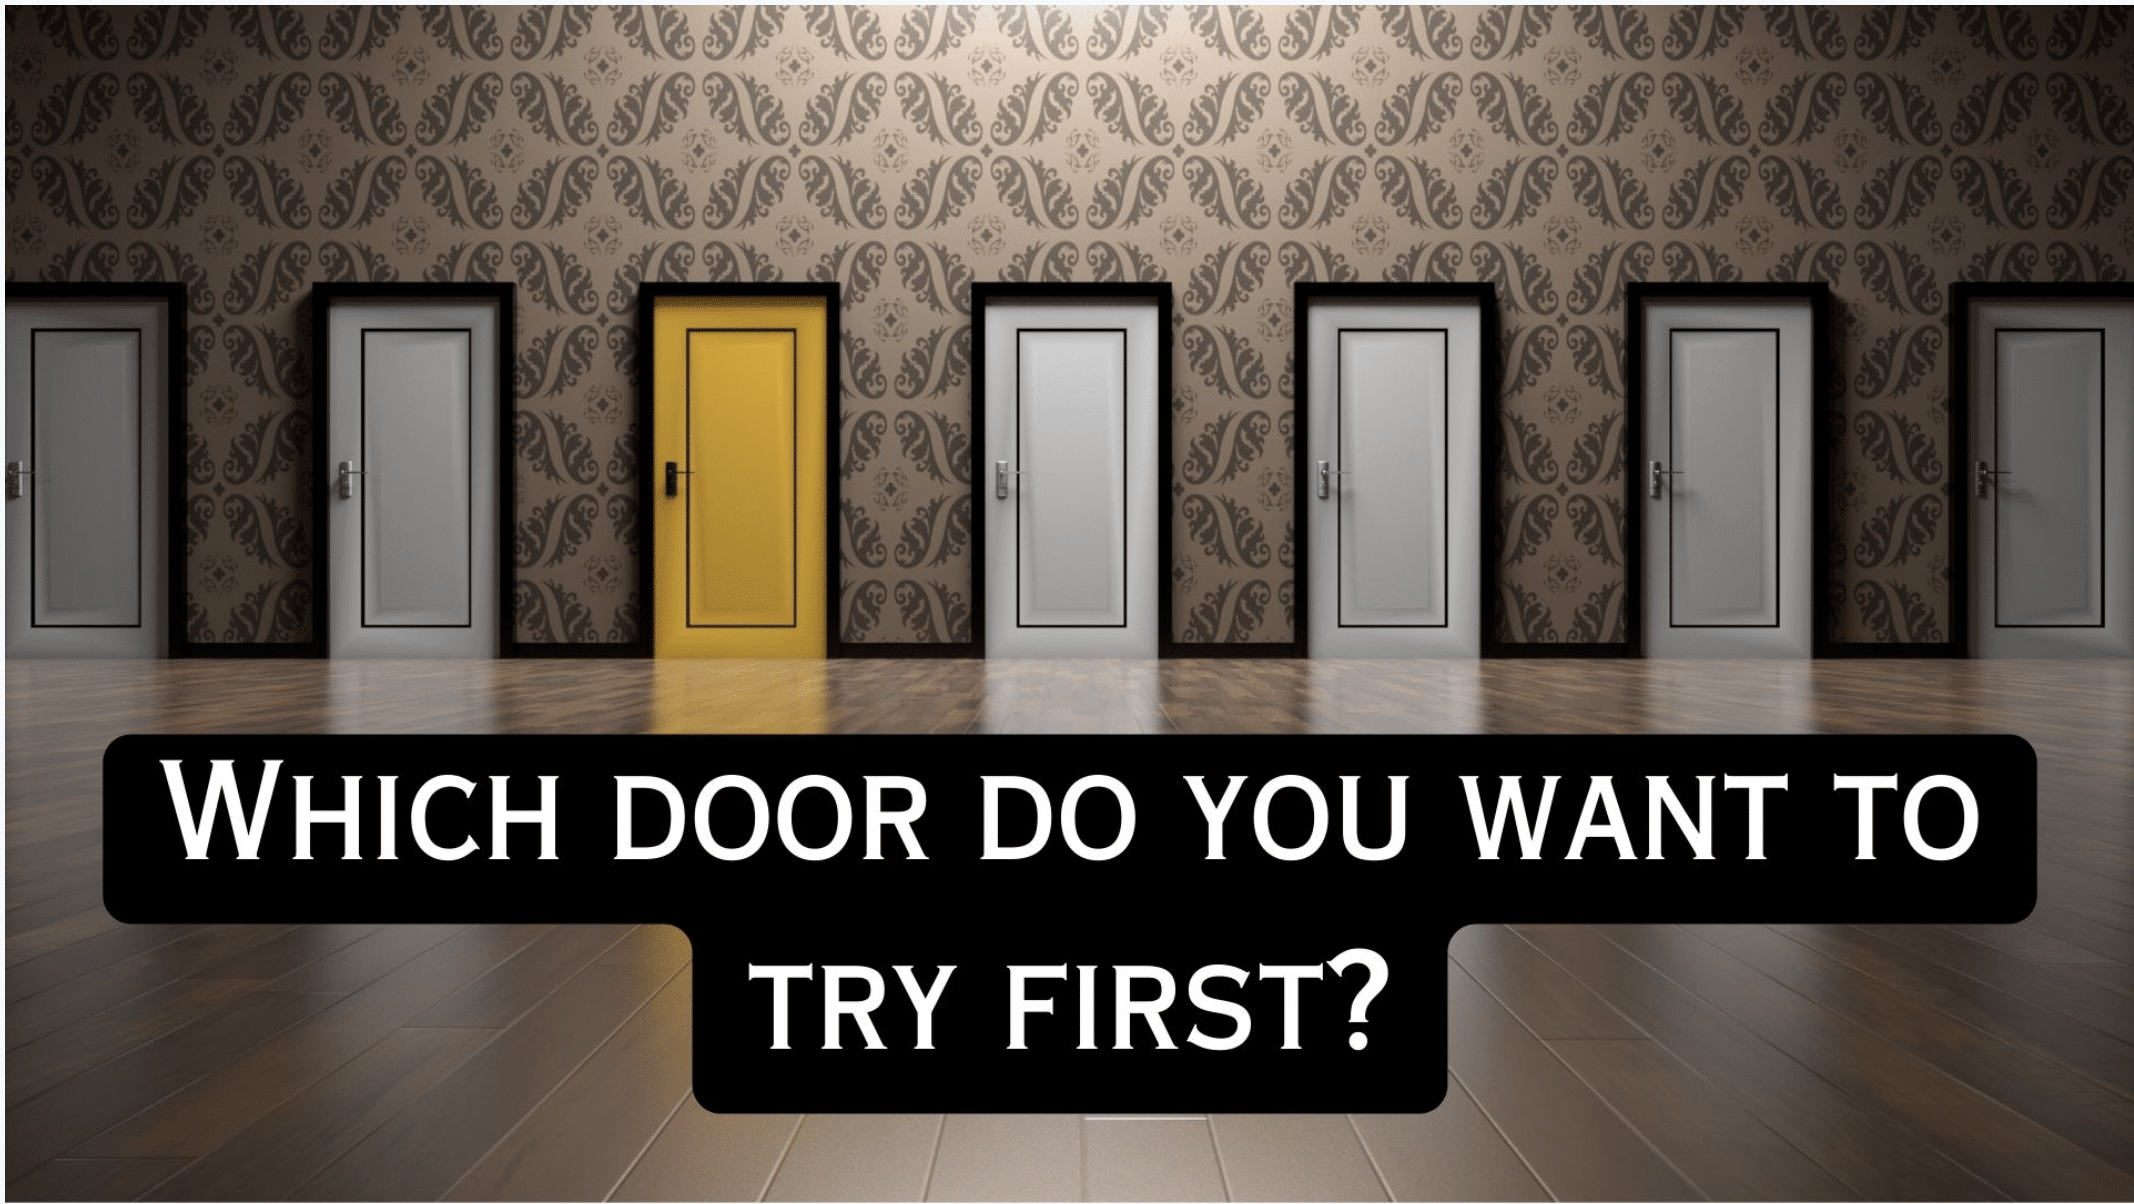 7 choices - 7 doors are on screen with the words "which door do you want to try first?"